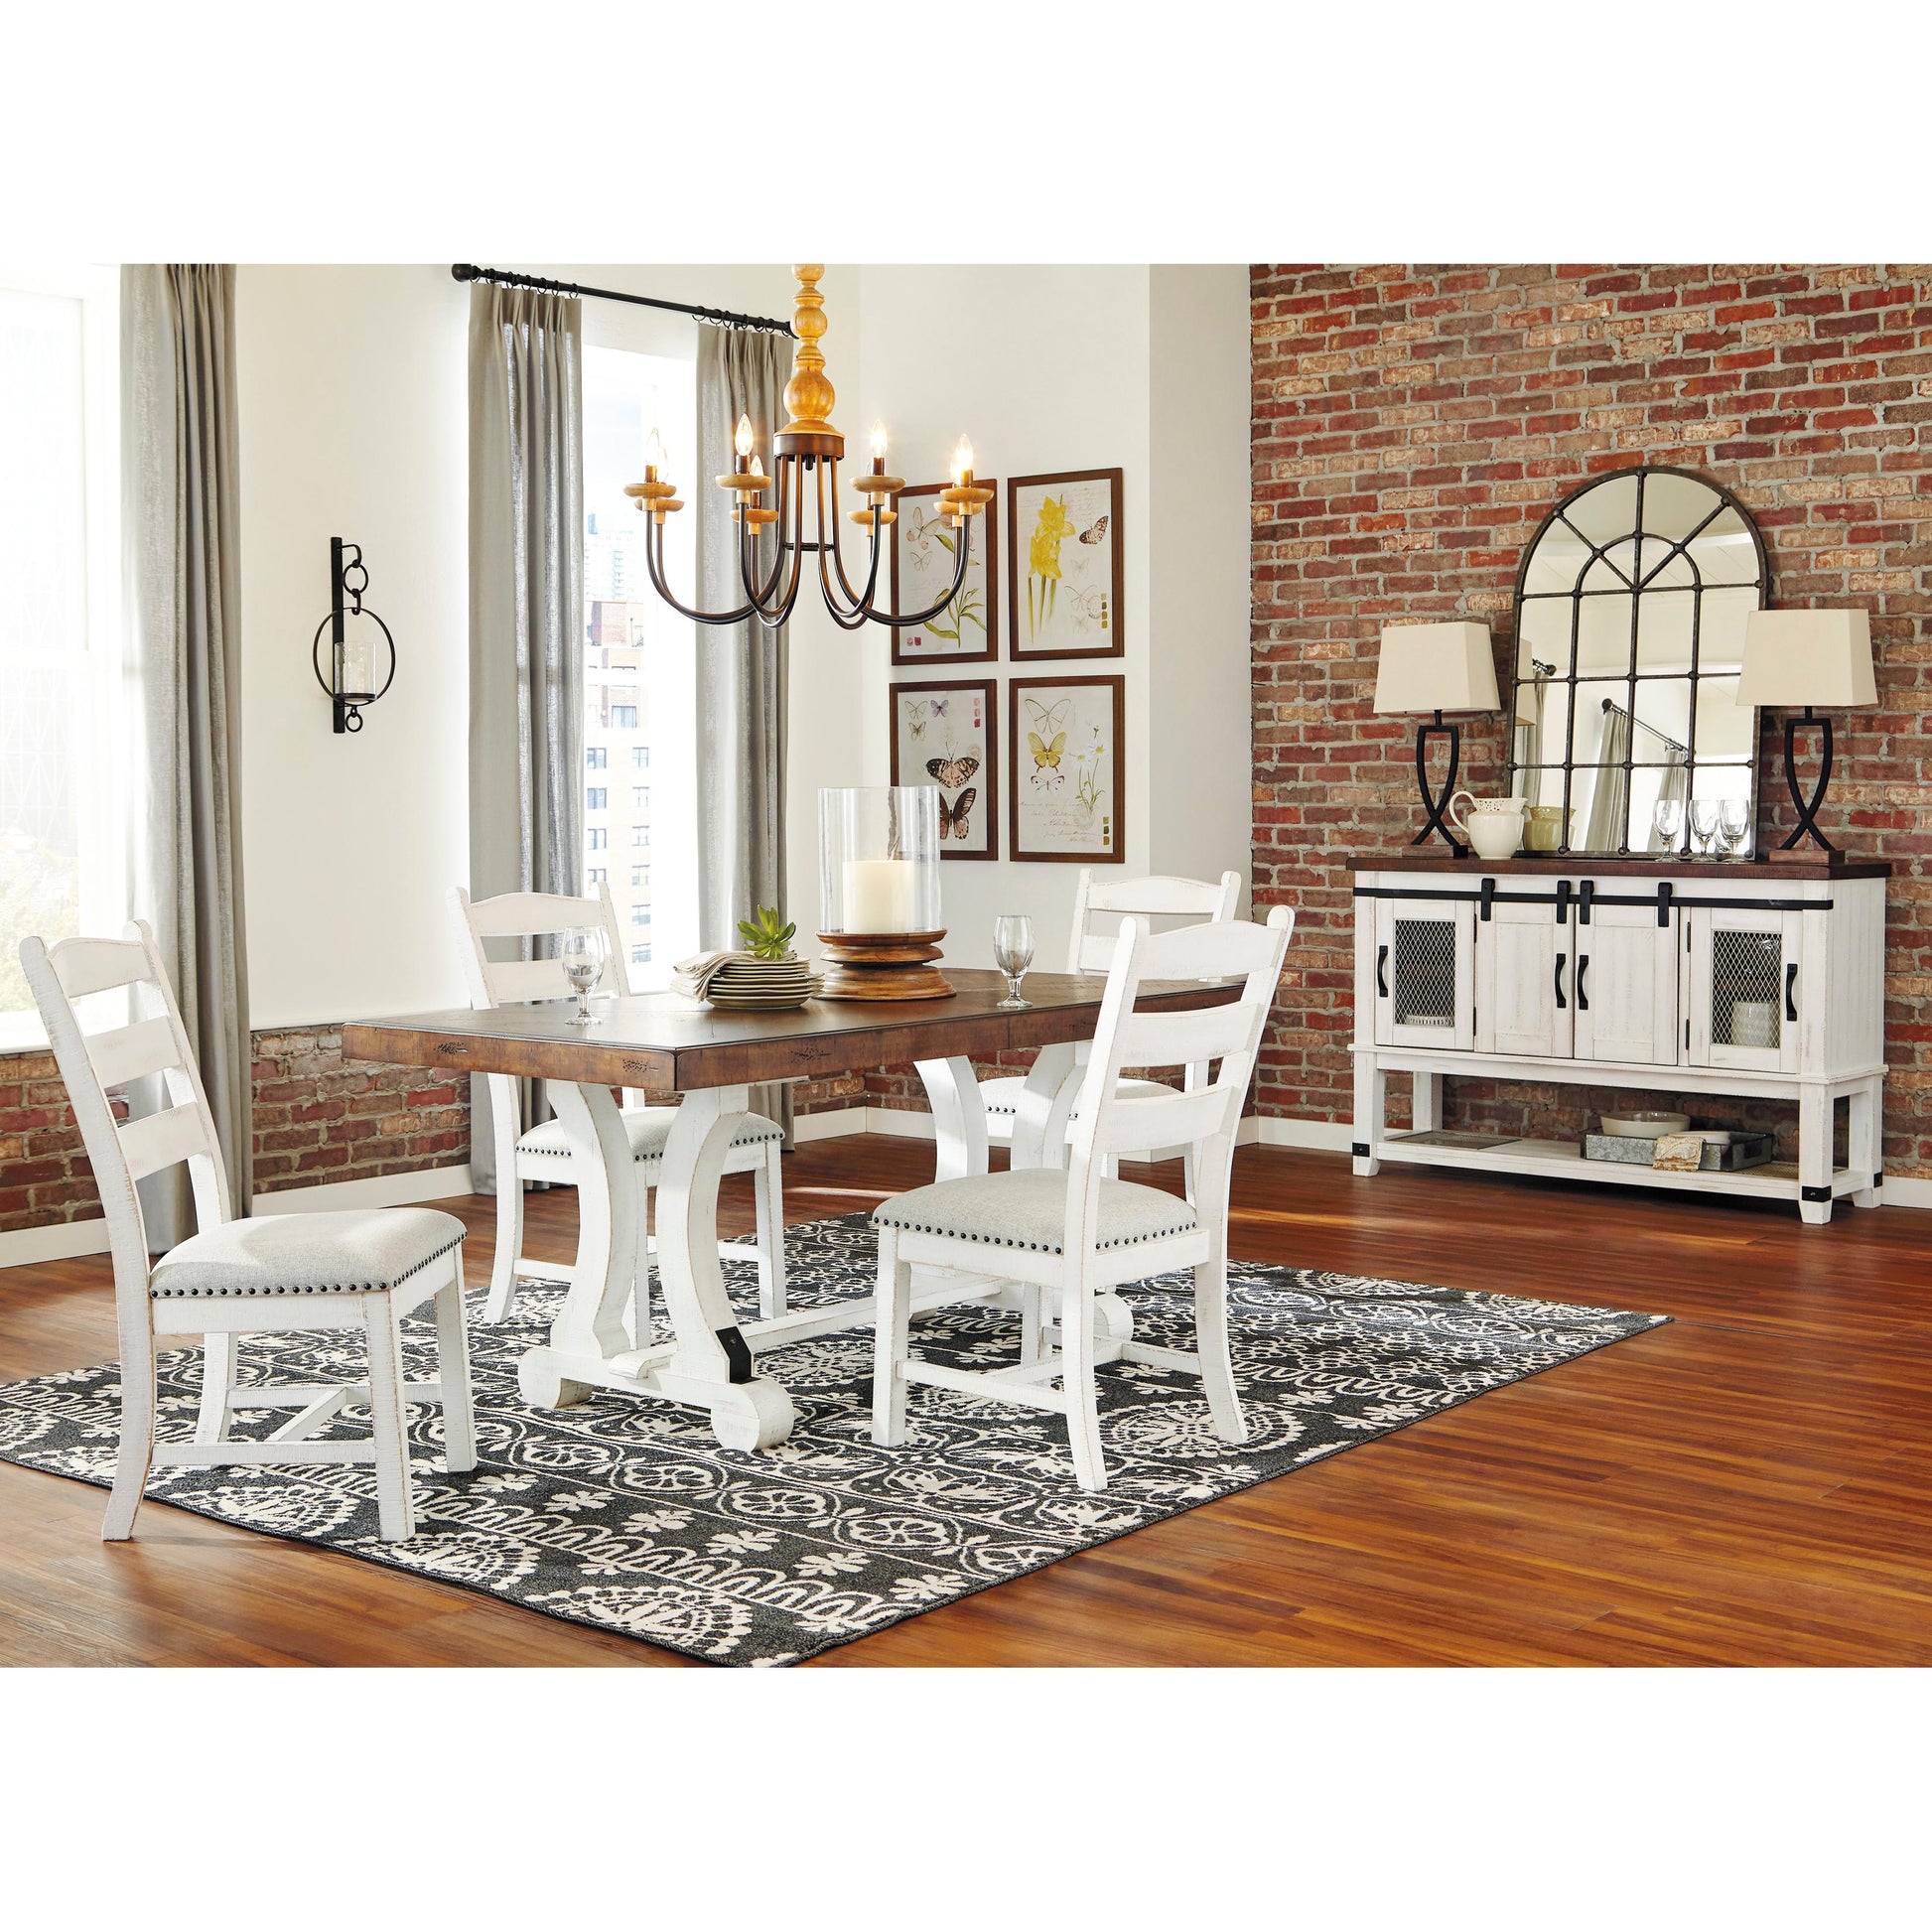 Signature Design by Ashley Valebeck Dining Table with Trestle Base D546-35